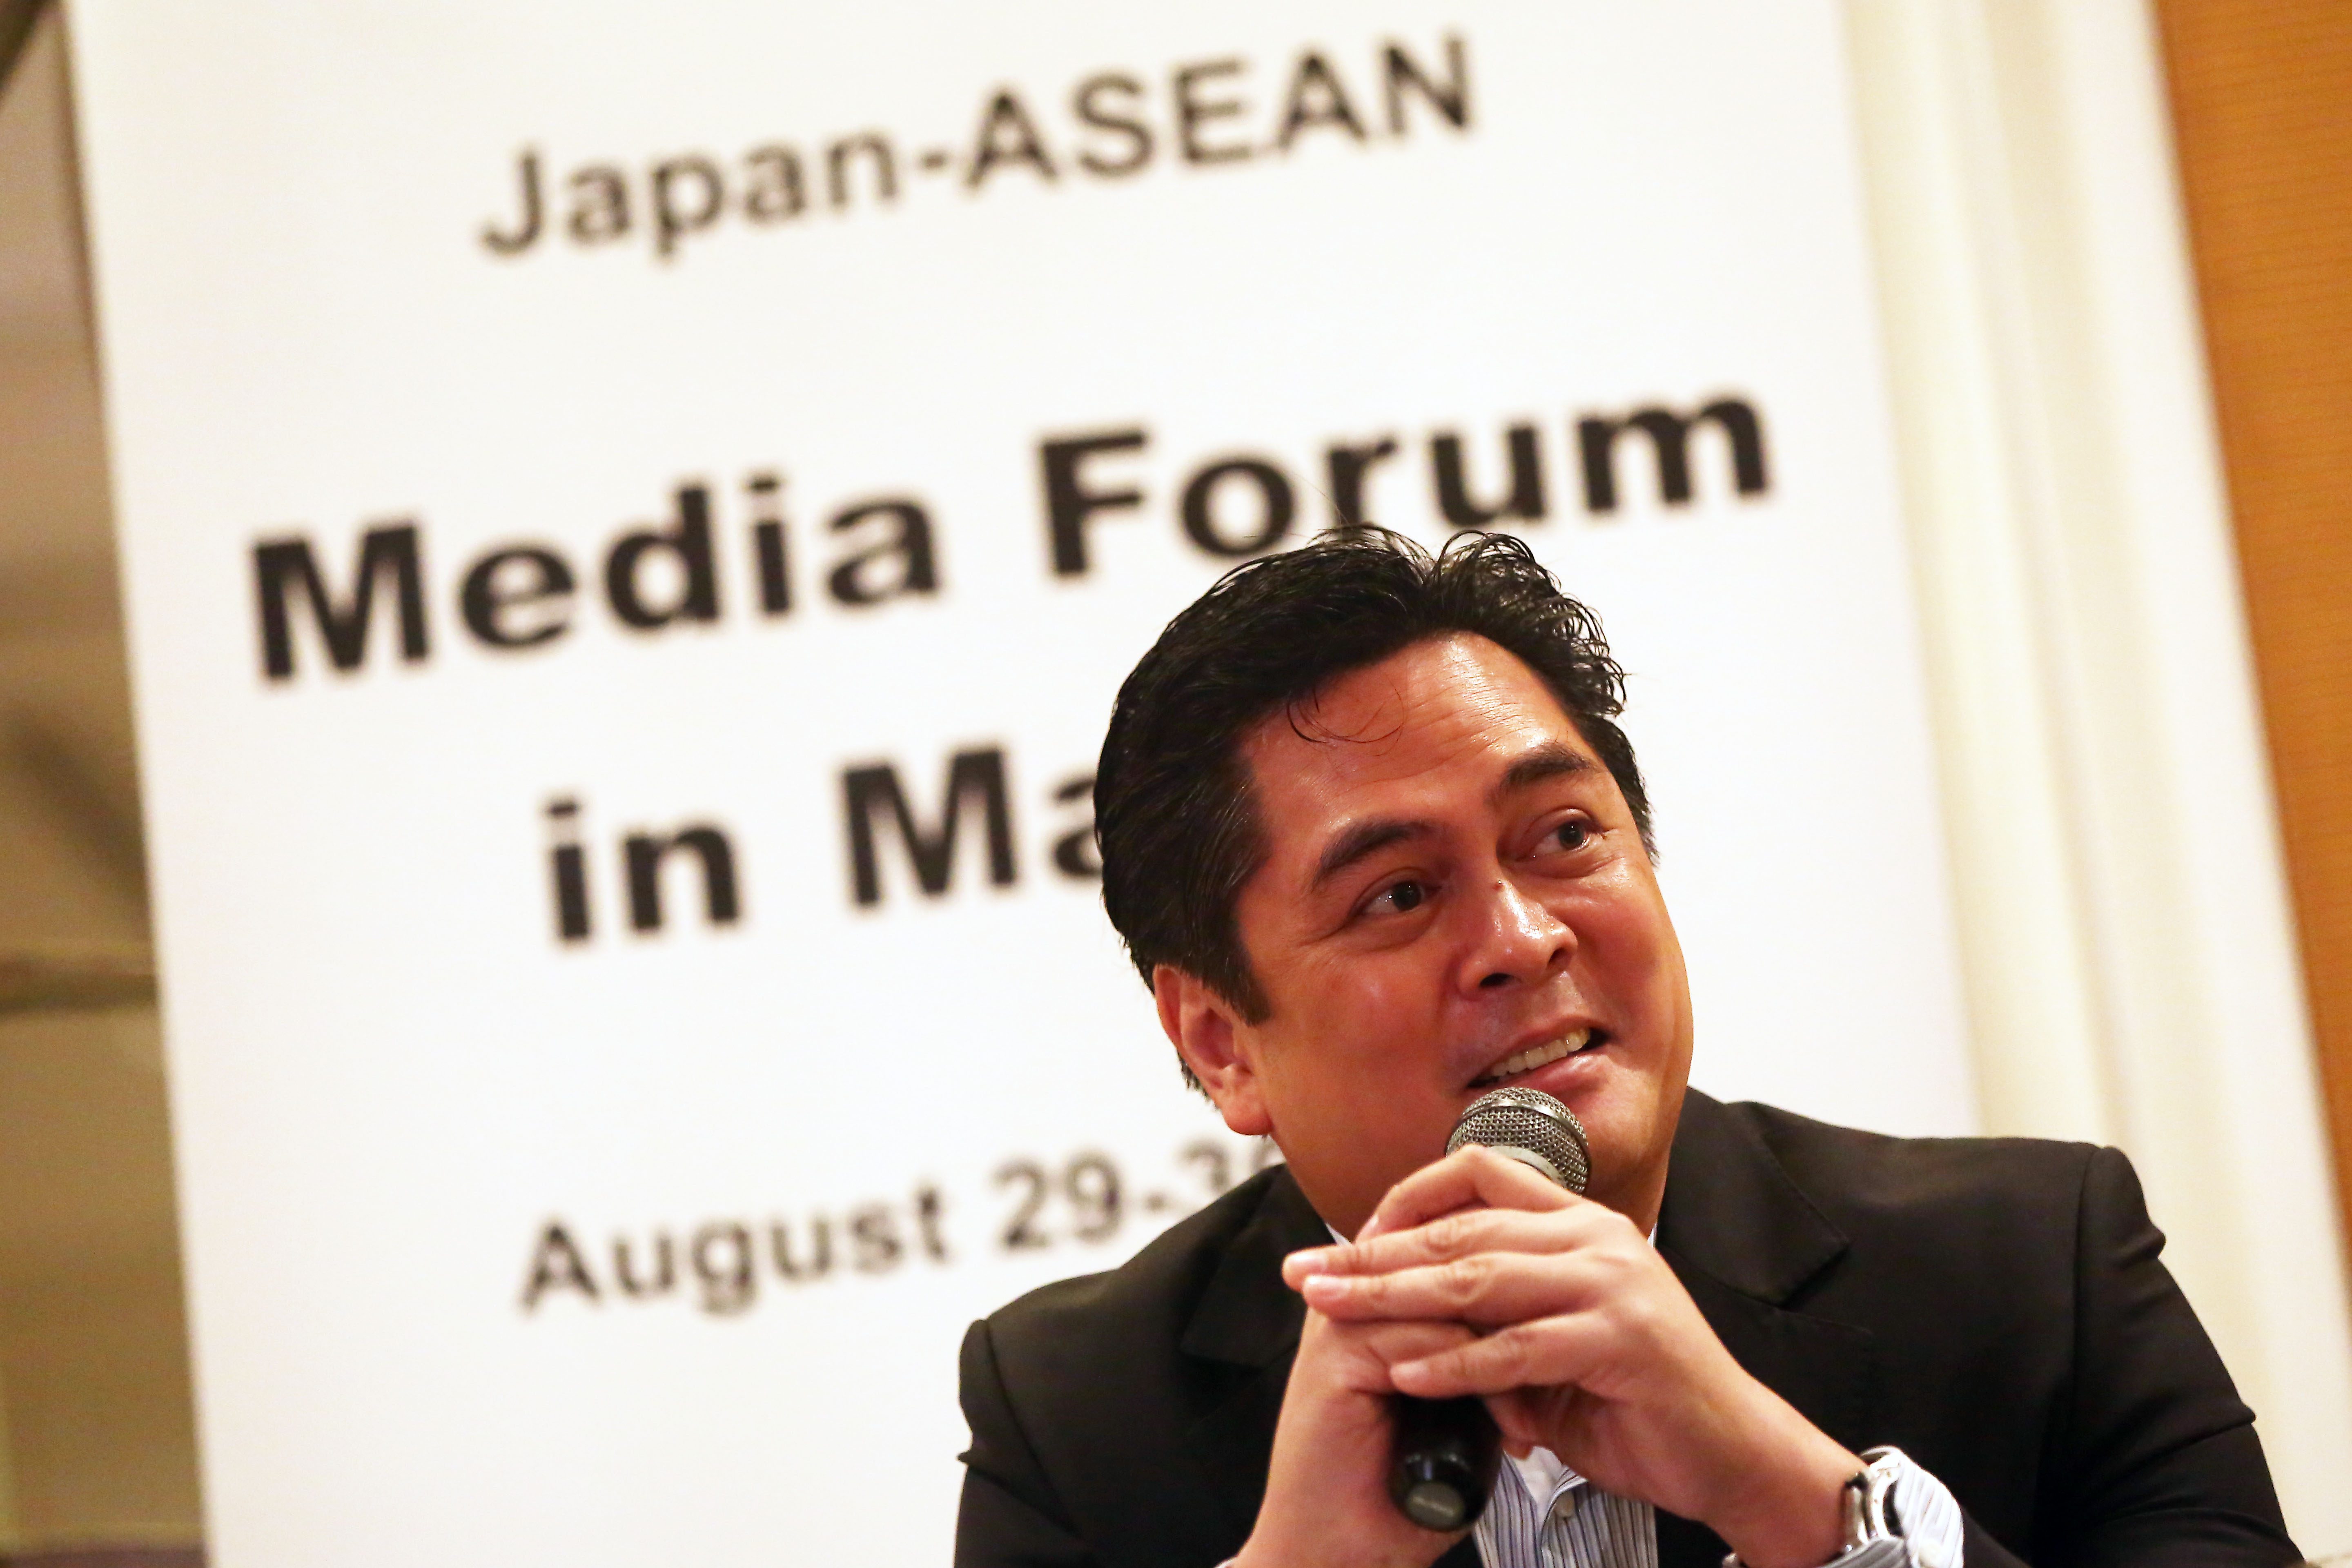 DEFENDING DUTERTE. Presidential Communications Operations Office (PCOO) Secretary Martin Andanar gives a short speech before journalists attending the Japan-ASEAN Media Forum in Manila. Photo by Ben Nabong/Rappler 